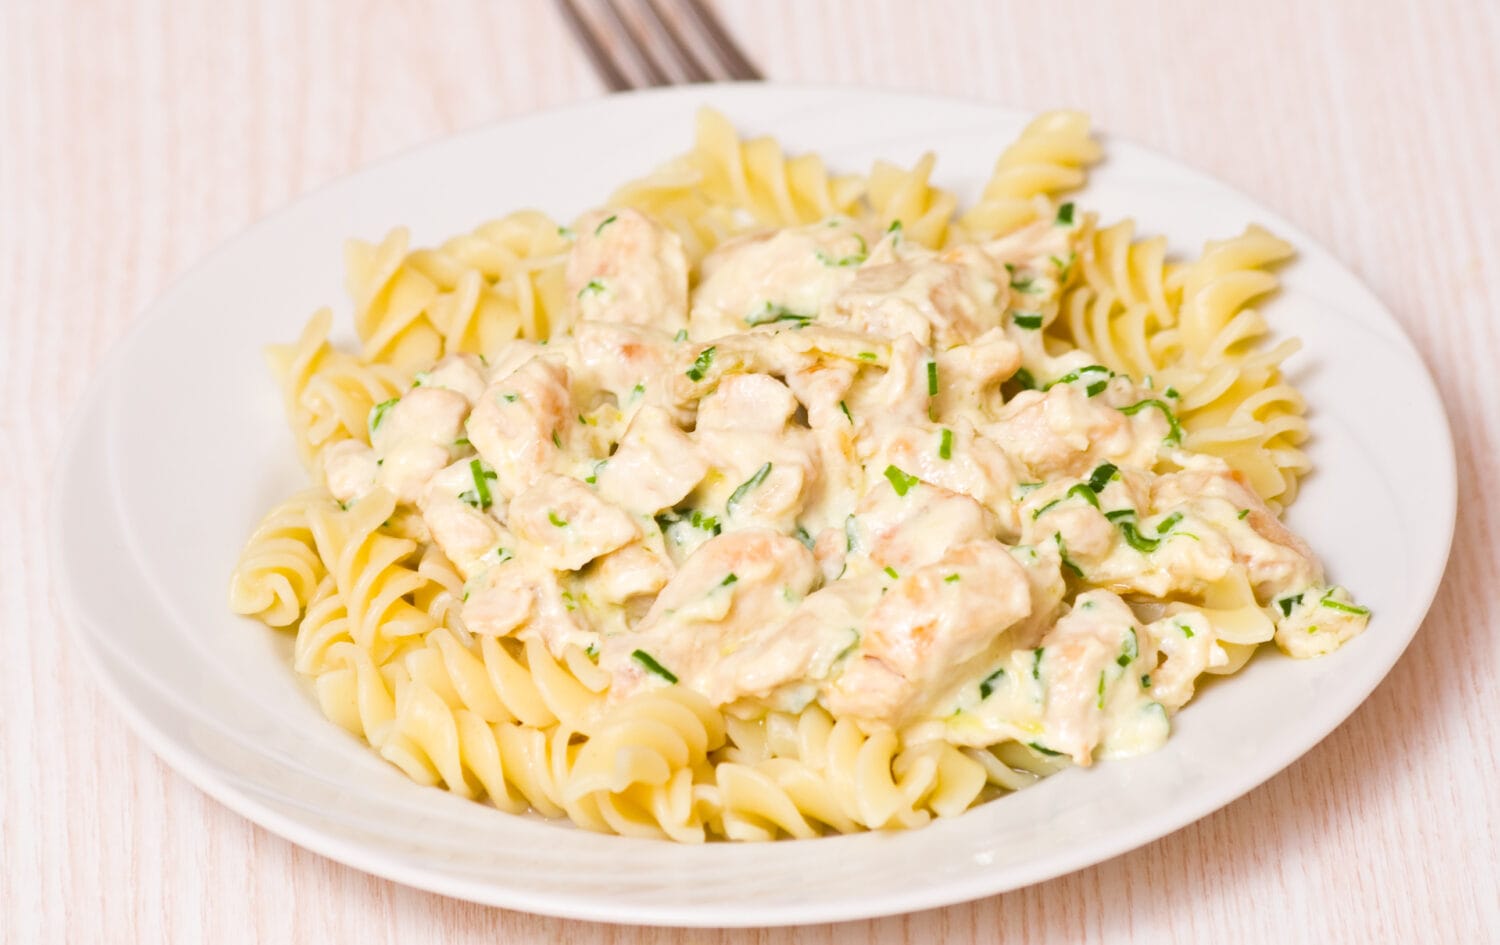 Sliced fried chicken fillet with garlic and rosemary in a creamy sauce. with fusilli pasta